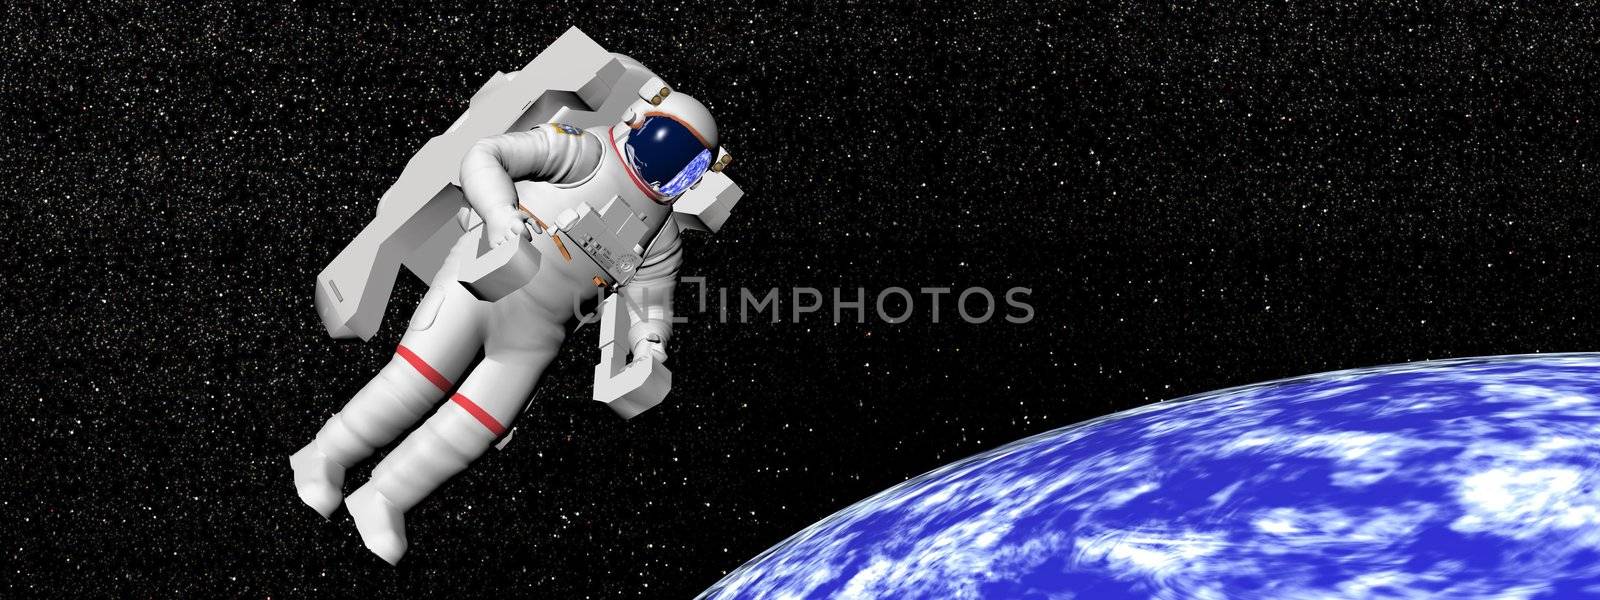 Astronaut floating in black background for space and looking at the earth - Elements of this image furnished by NASA